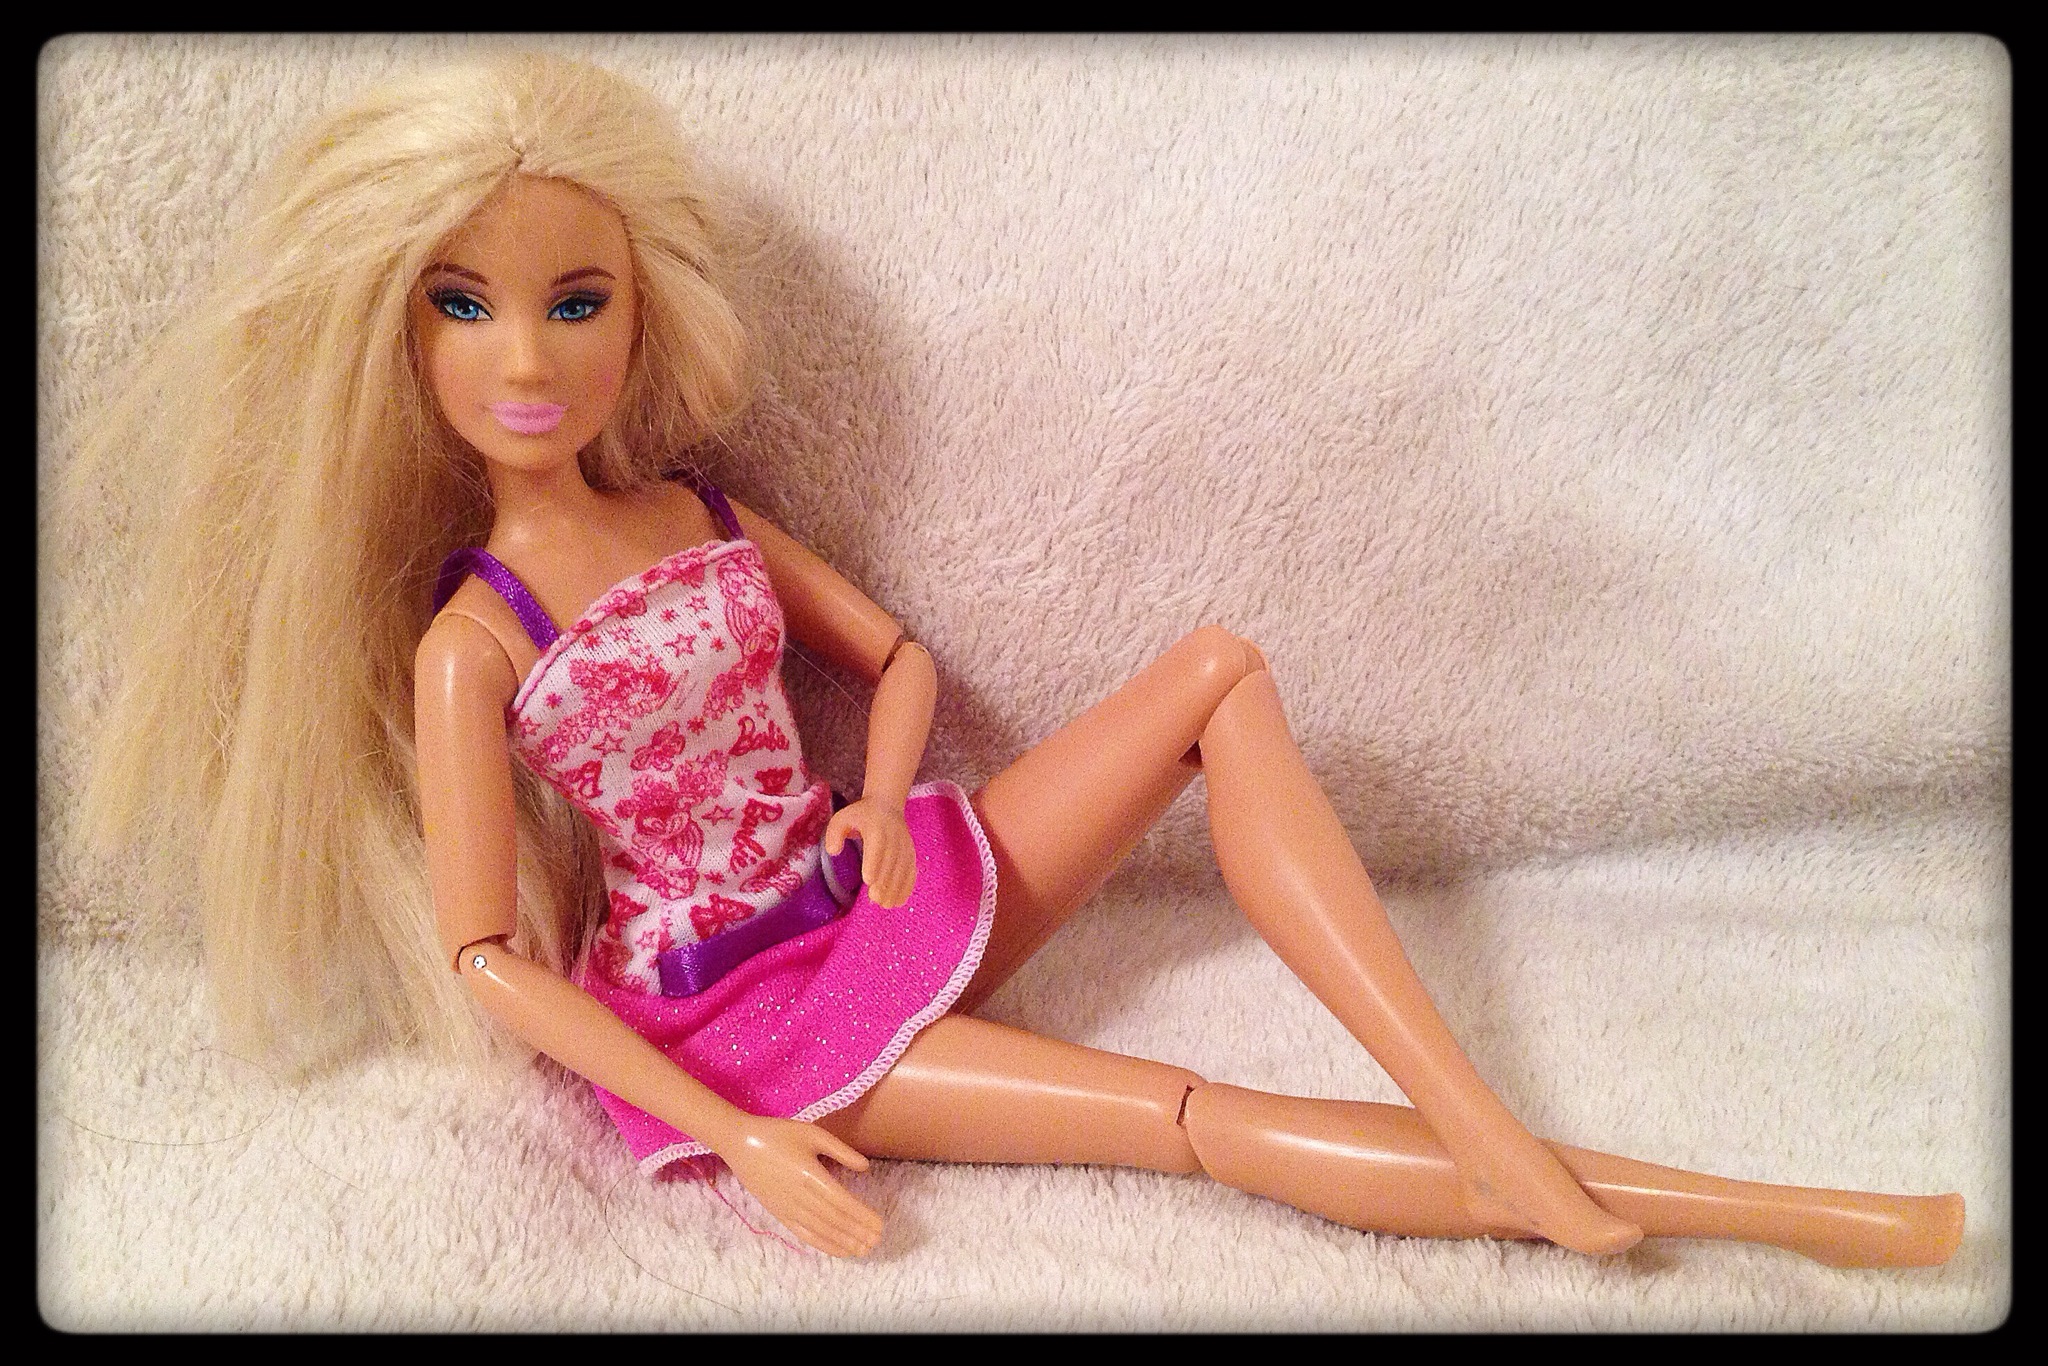 barbie with bendable arms and legs